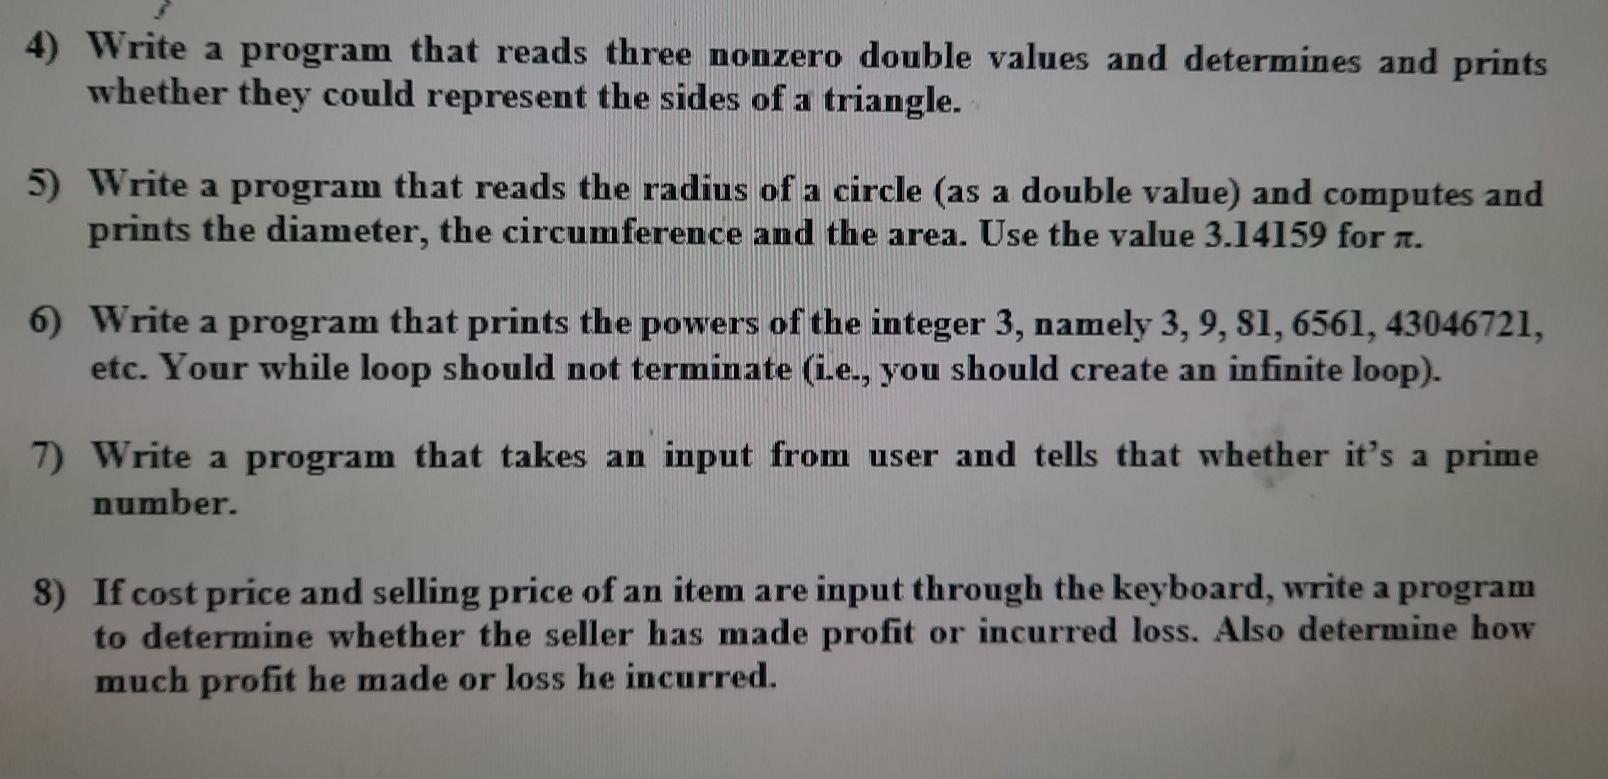 4) Write a program that reads three nonzero double values and determines and prints whether they could